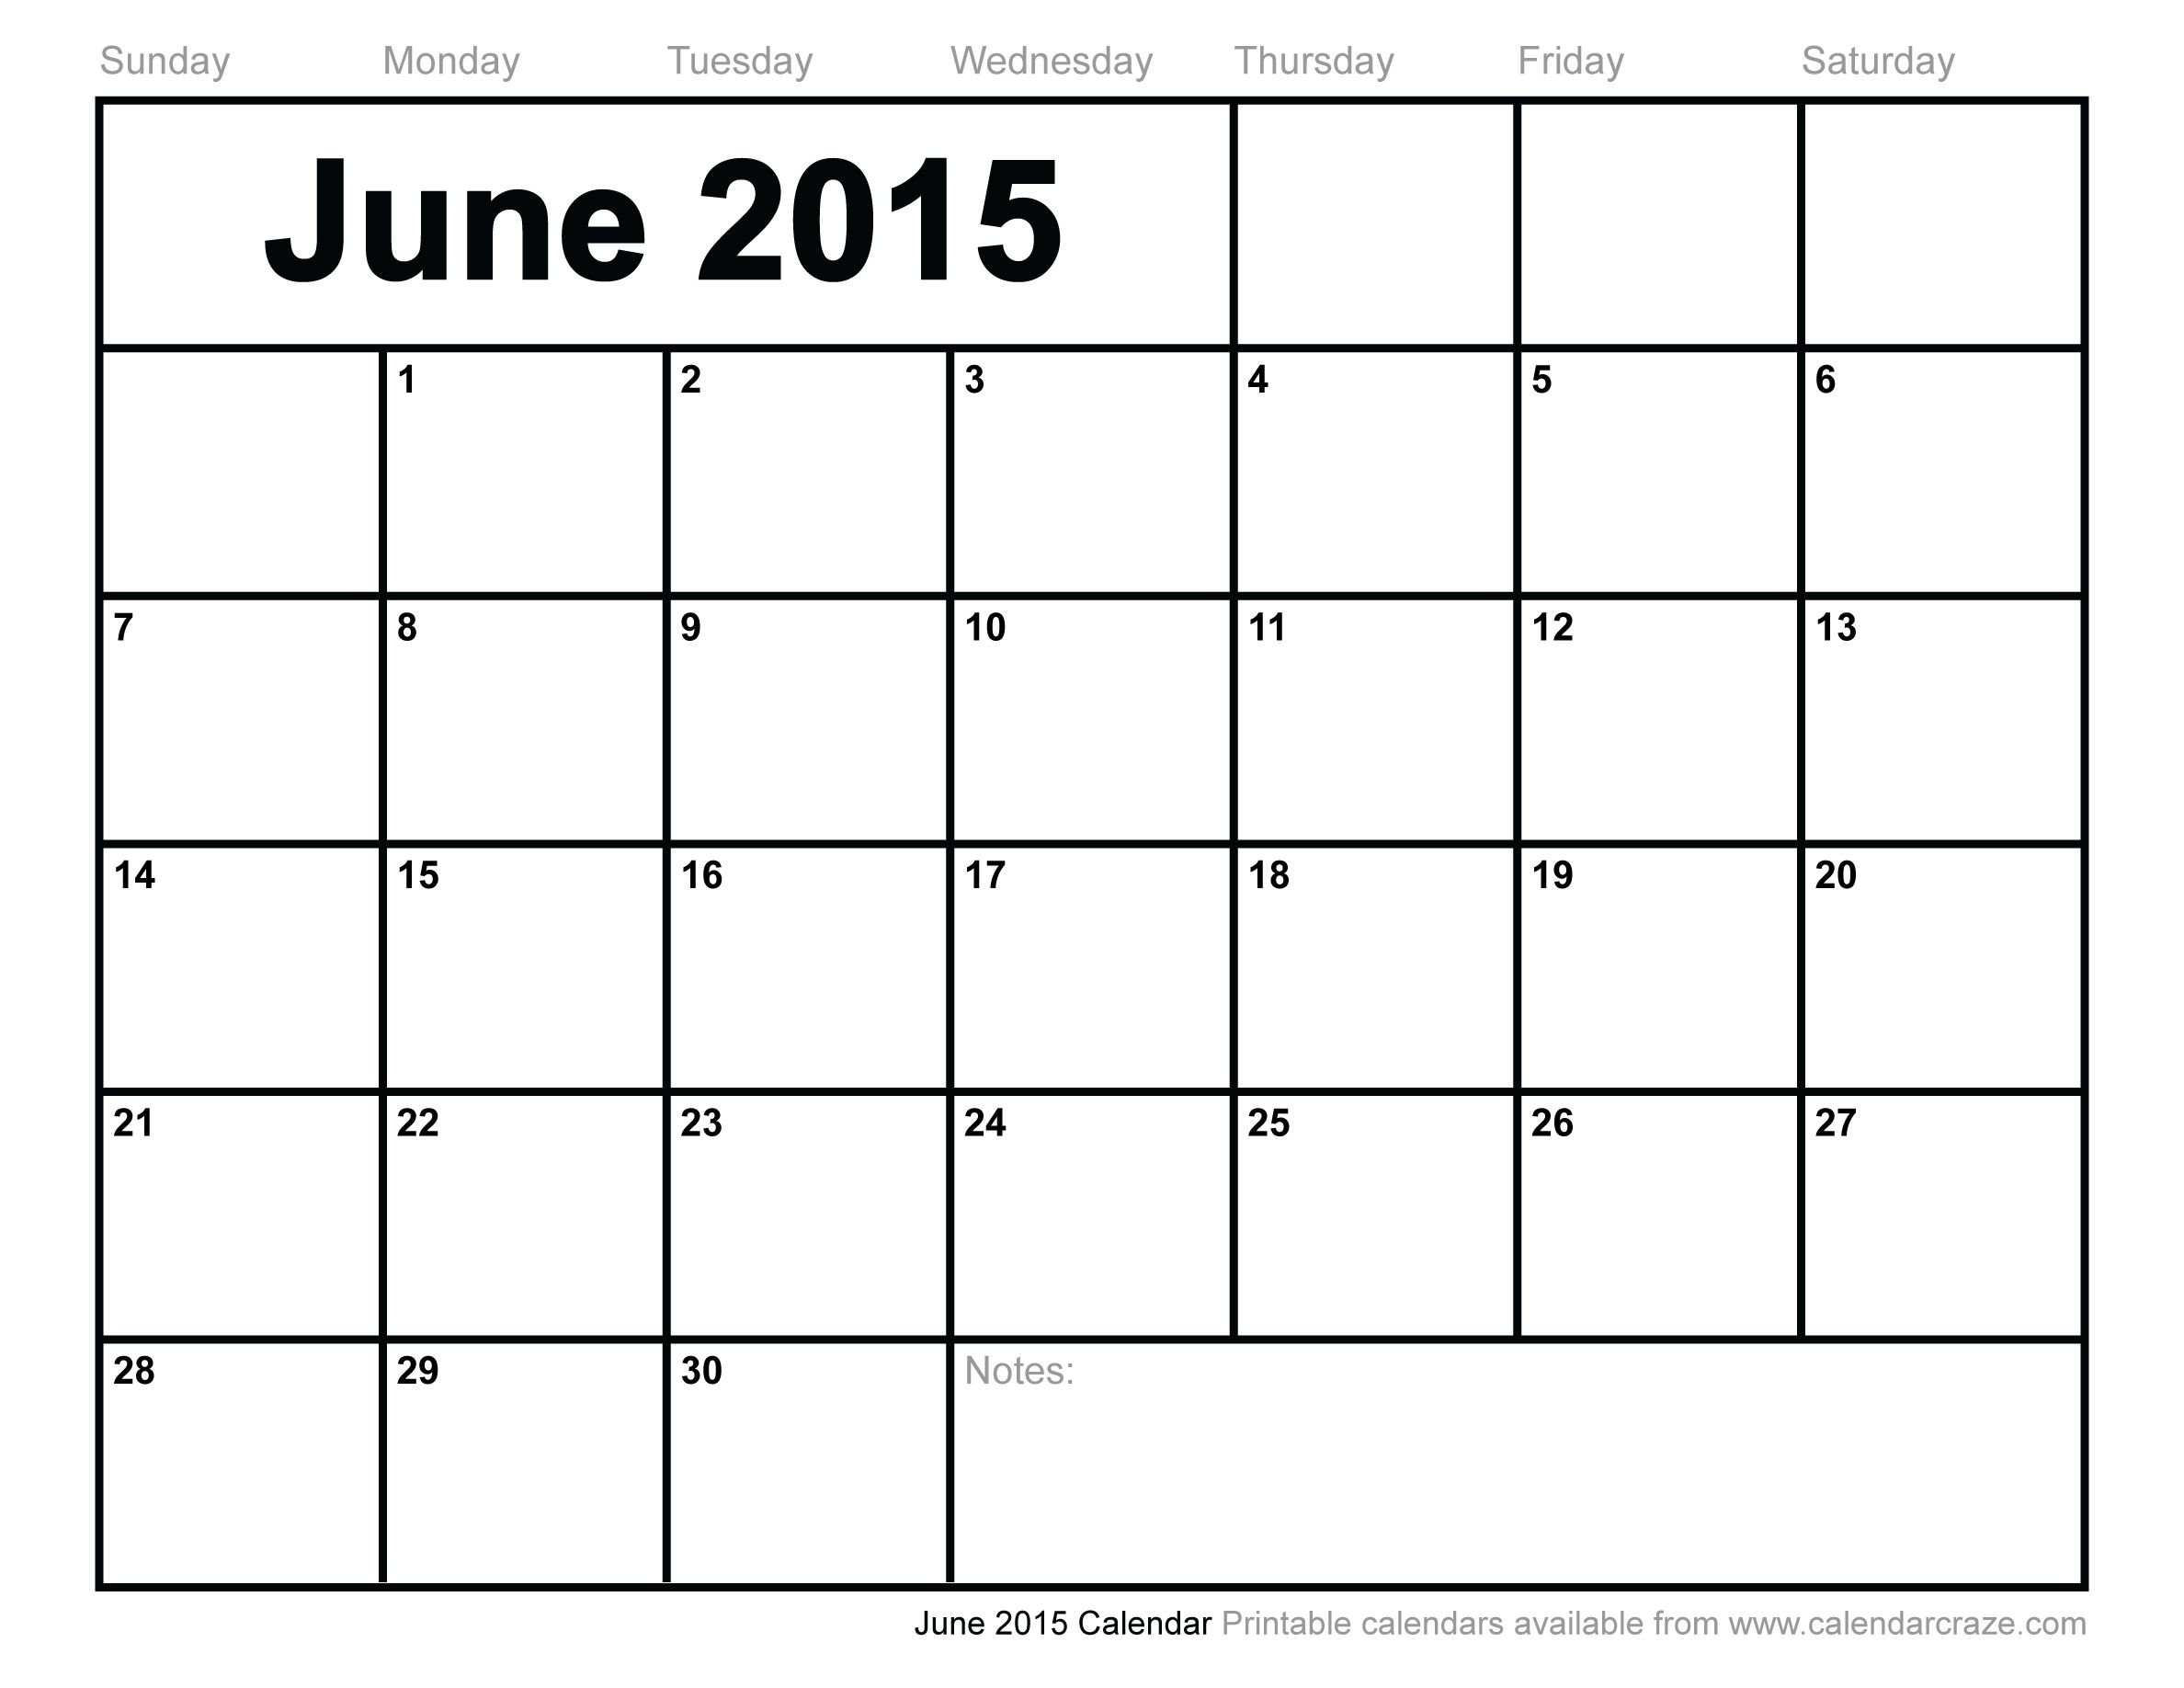 Blank Monthly Calendar Sun-Sat Printable For Free Of Cost